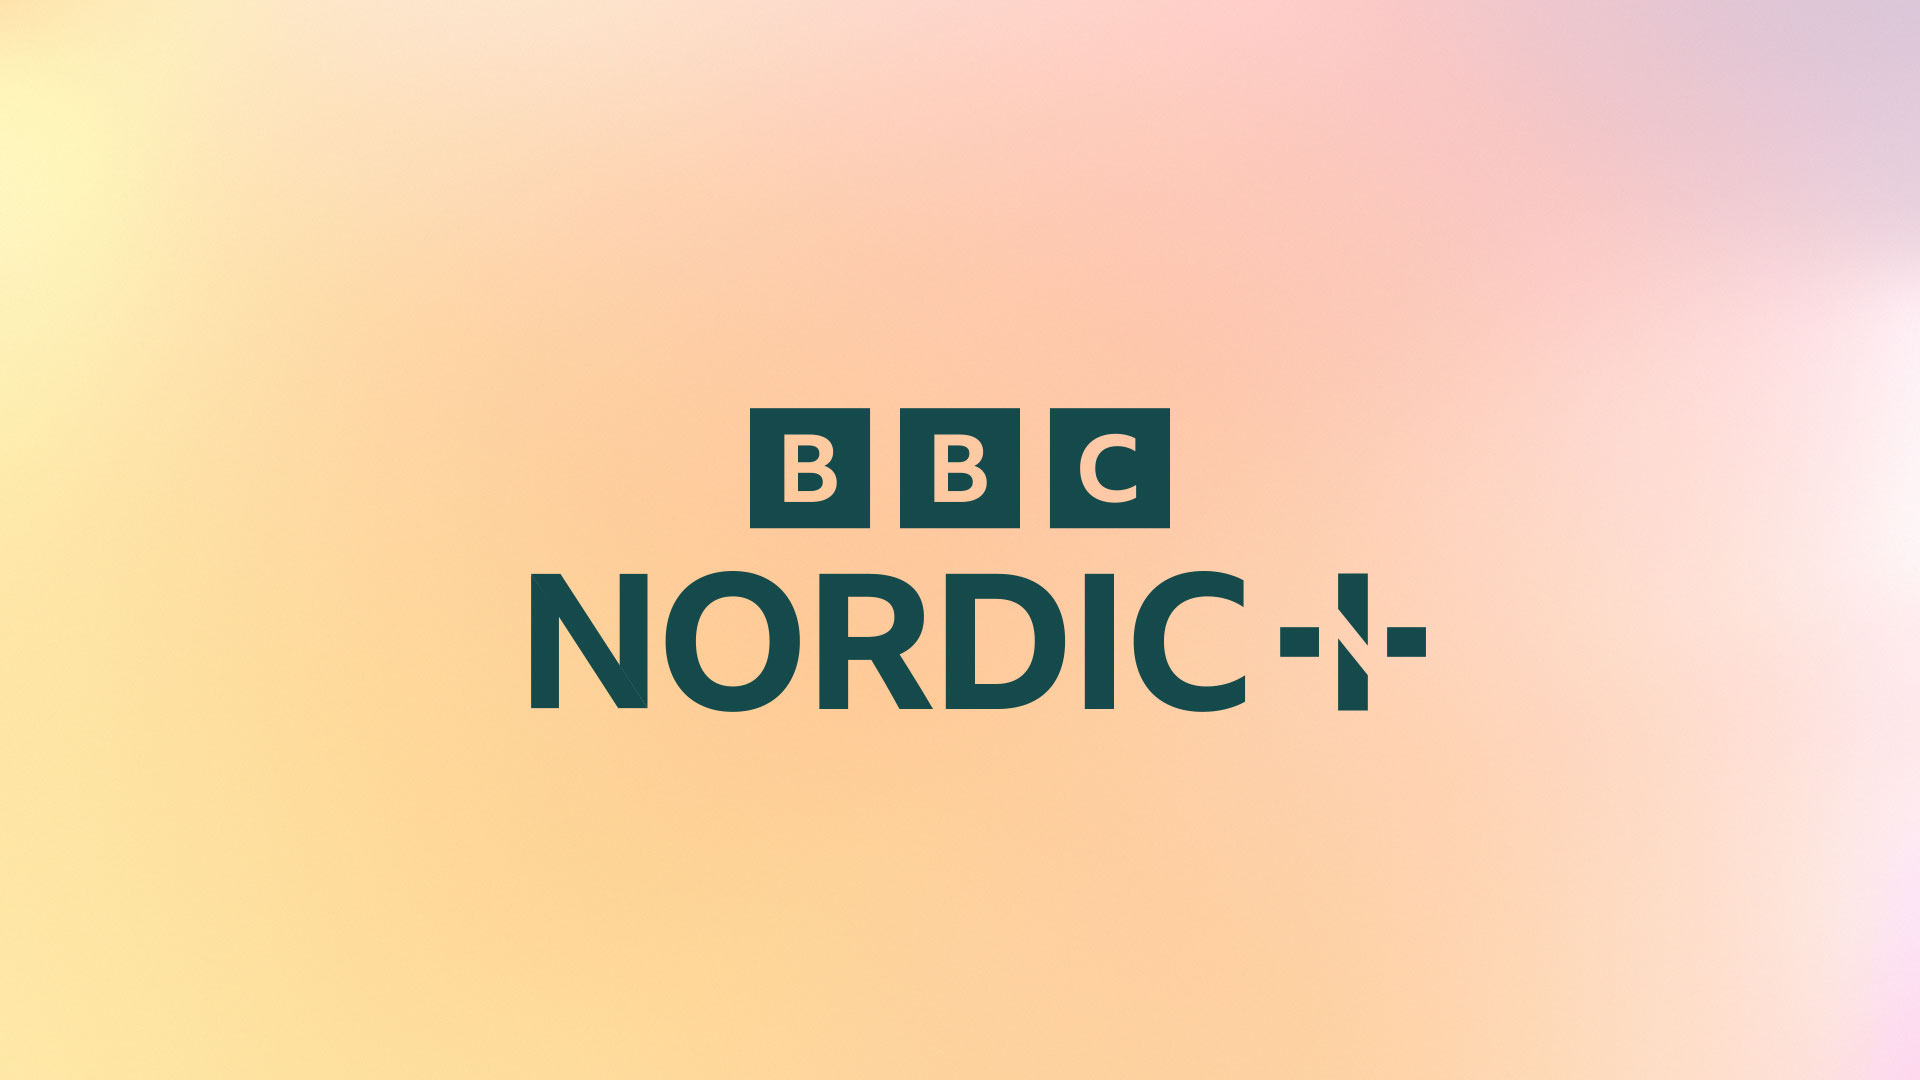 weareseventeen Forge Identity for New BBC Nordic Channel With an Aesthetic Built on the Principles of Light